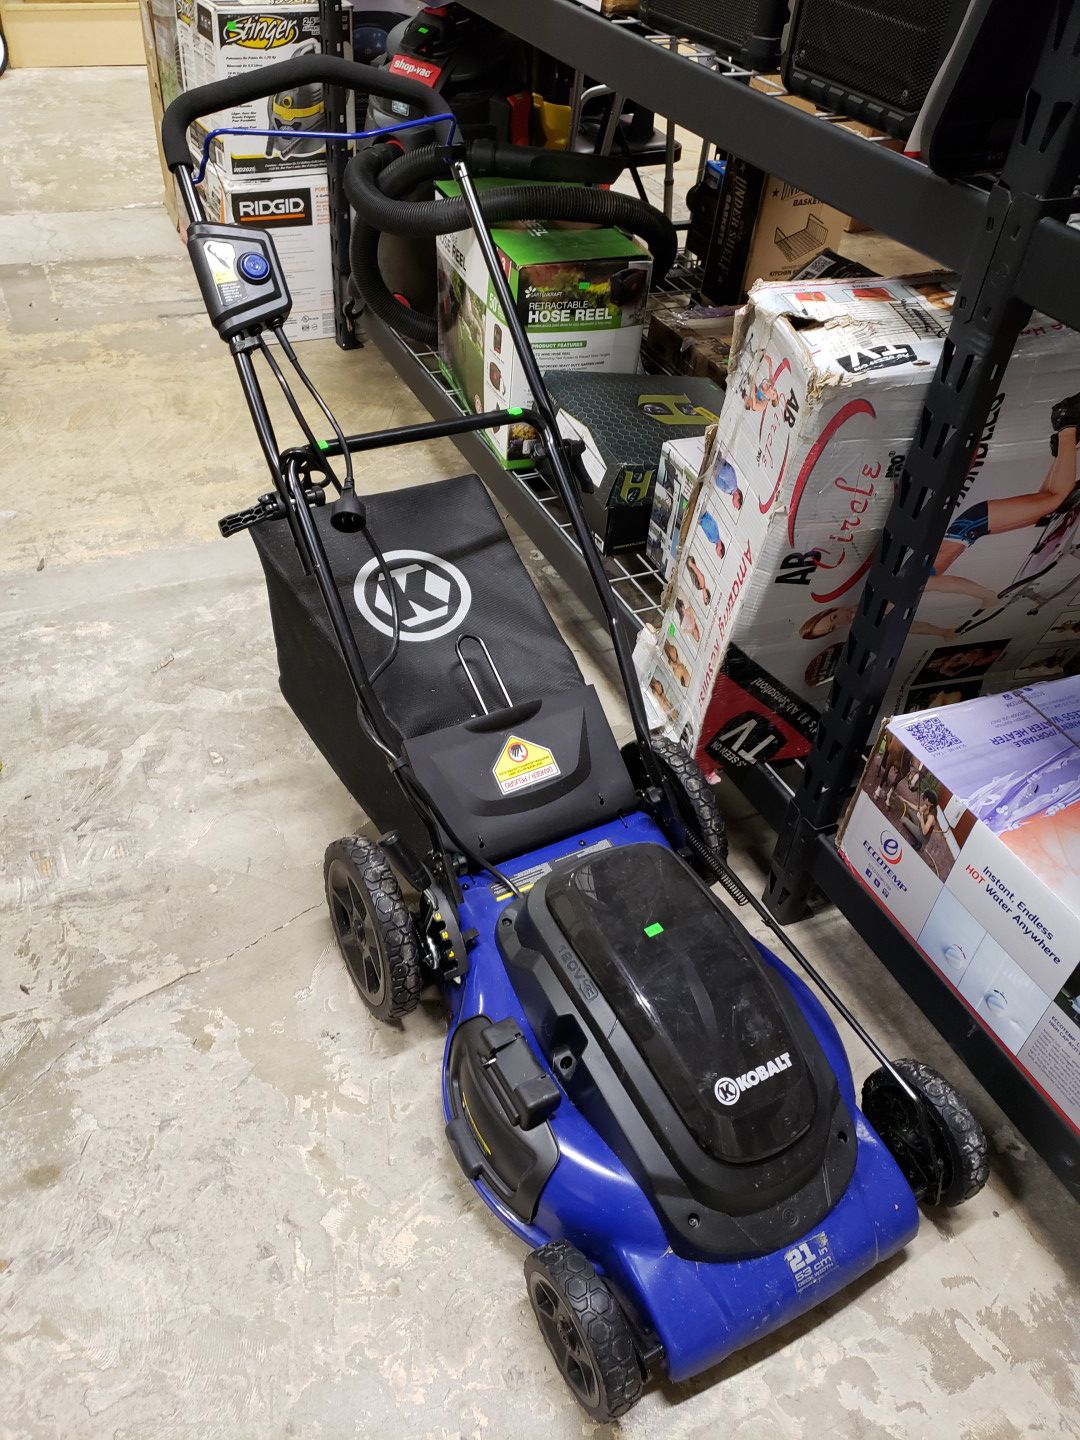 Kobalt 21" electric lawn mower. Plugs into extension Cord. $100 FIRM